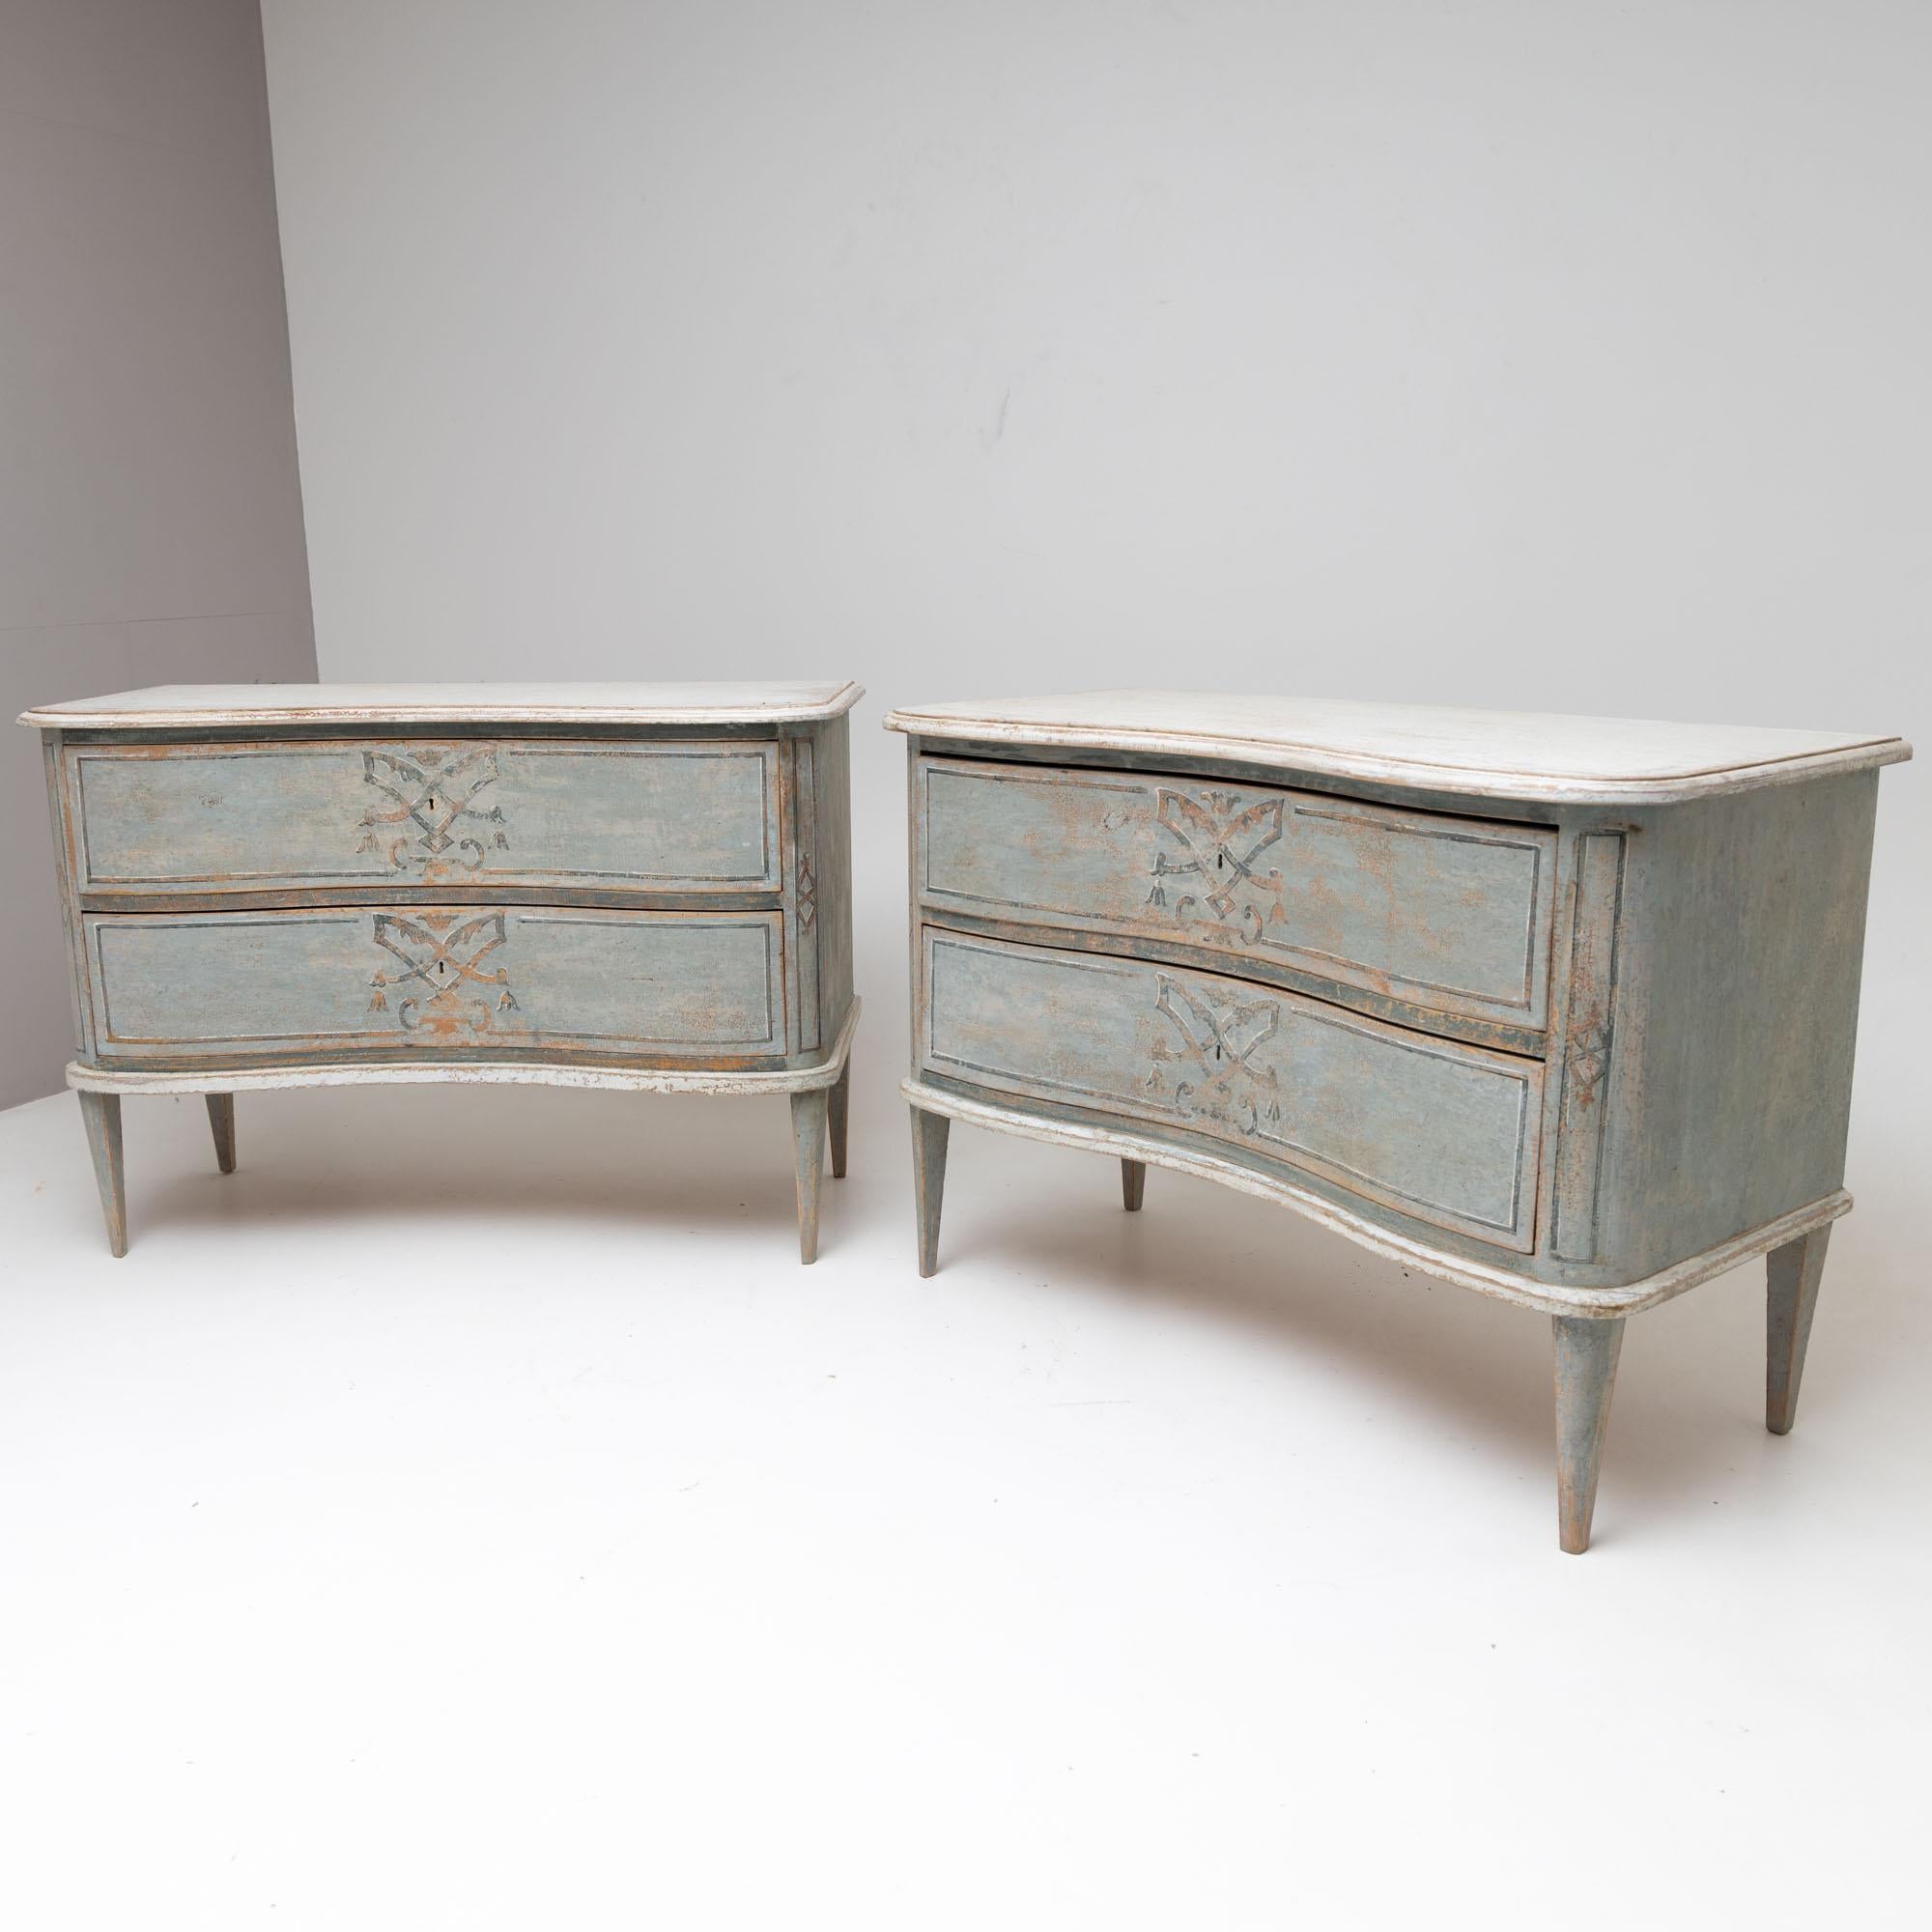 Pair of chests of drawers with two drawers and curved fronts. The chests of drawers rest on square tapered feet and have been repainted and given an antique patina. The light blue setting is contrasted by white accents. The decors are based on